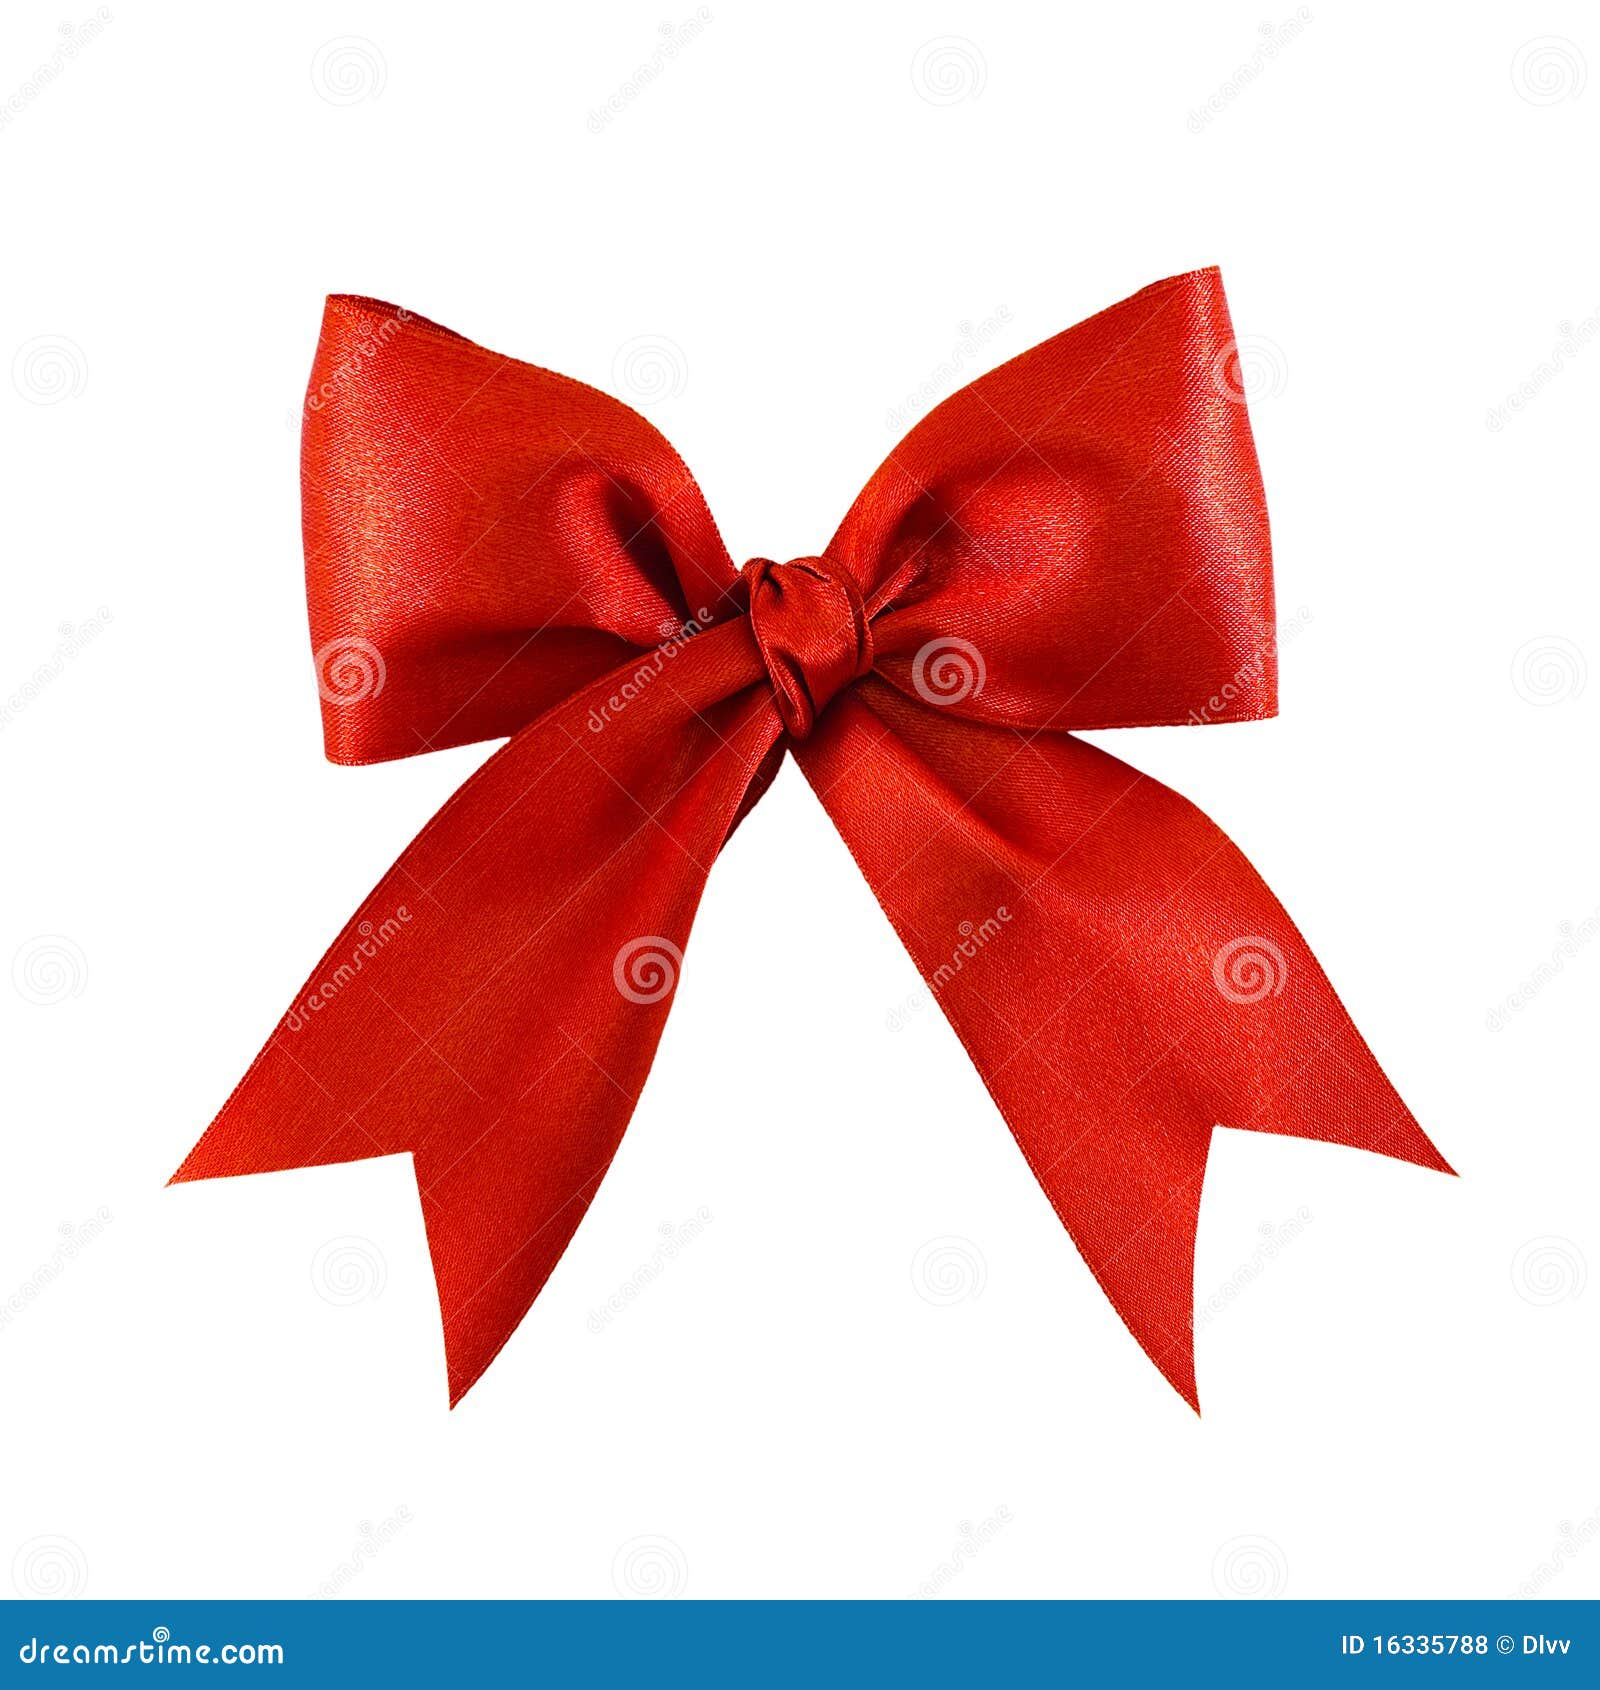 red satin gift bow